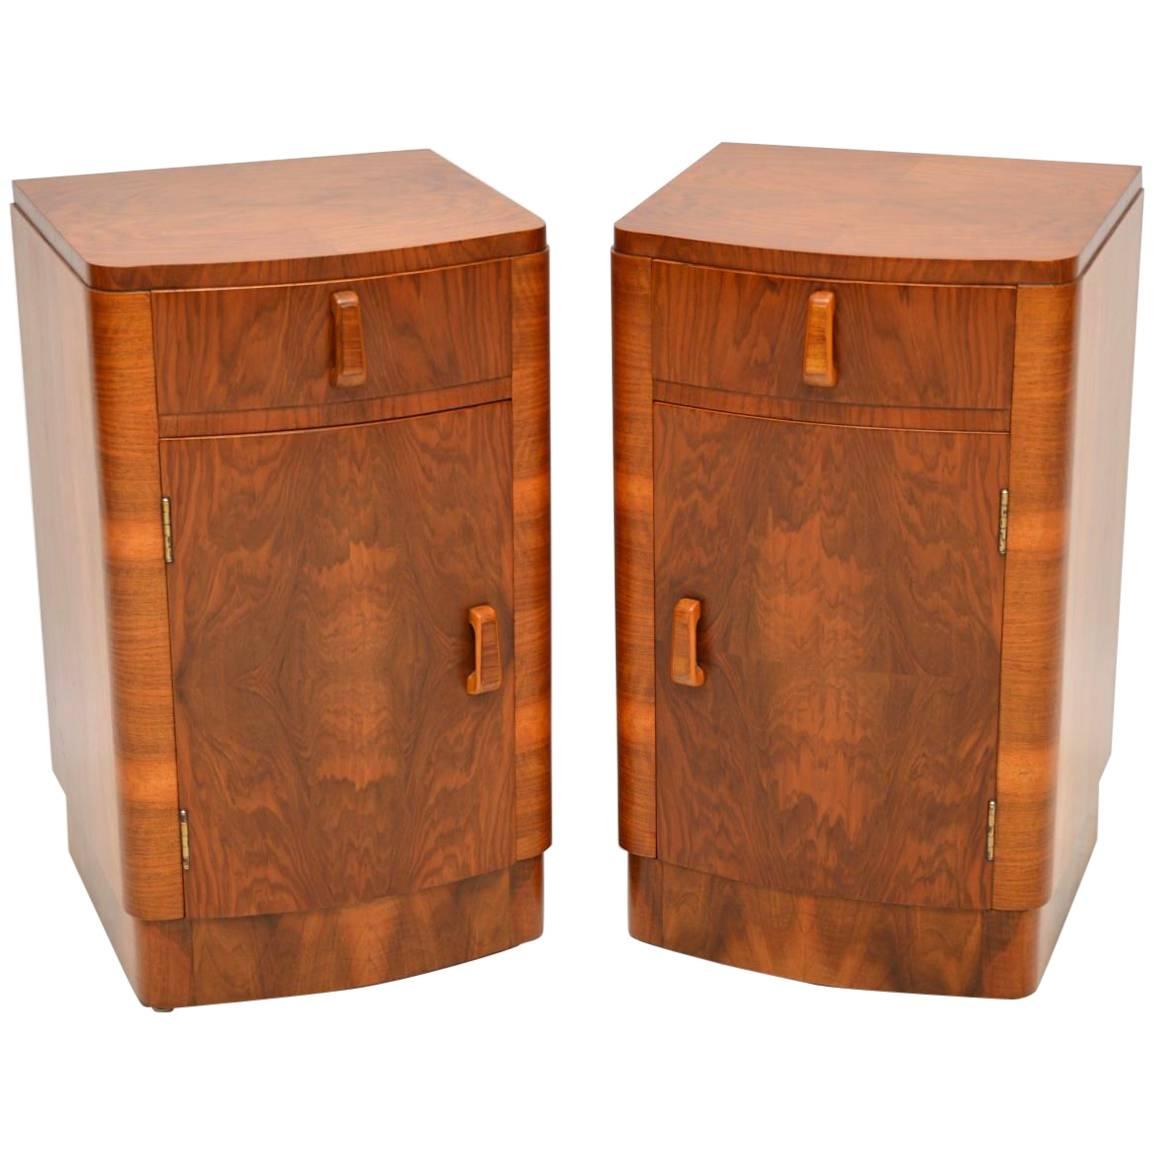 1920s Pair of Walnut Art Deco Bedside Cabinets